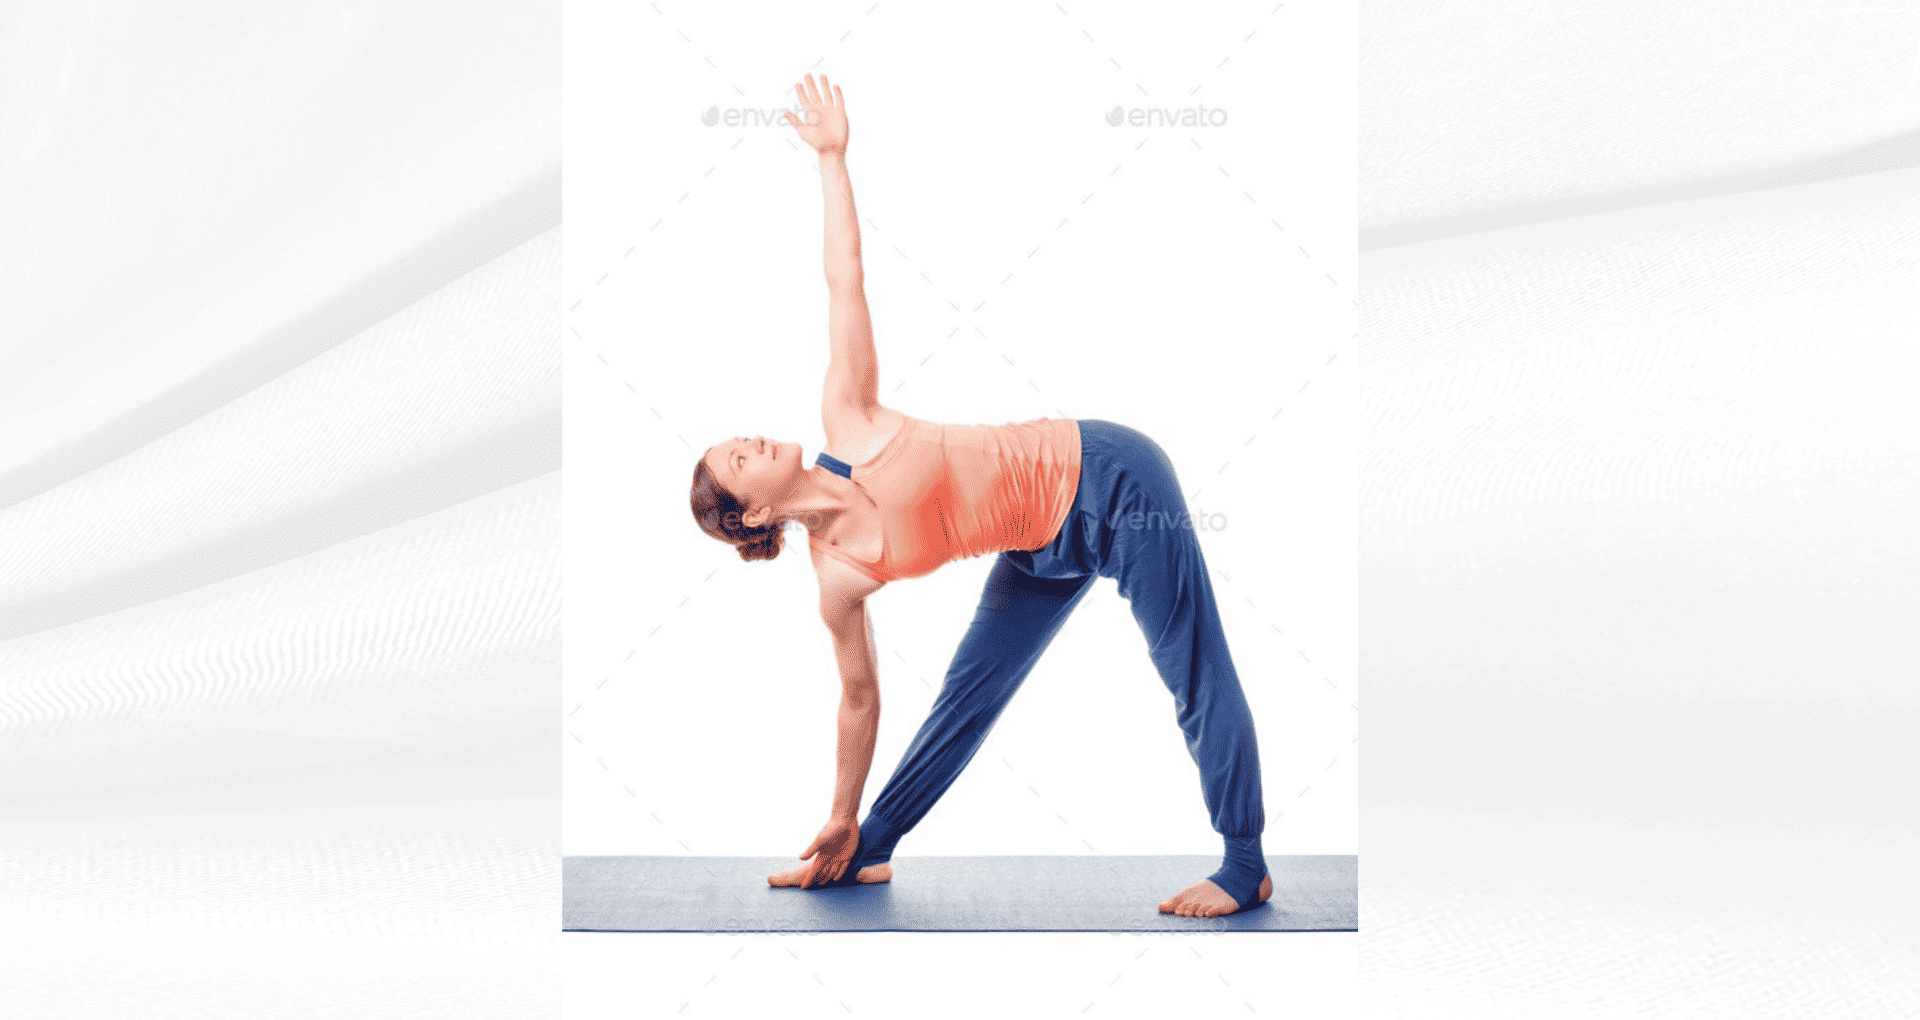 Top 6 Simple Yet Awesome Yoga Poses To Increase Height | by 7pranayama App  | Medium